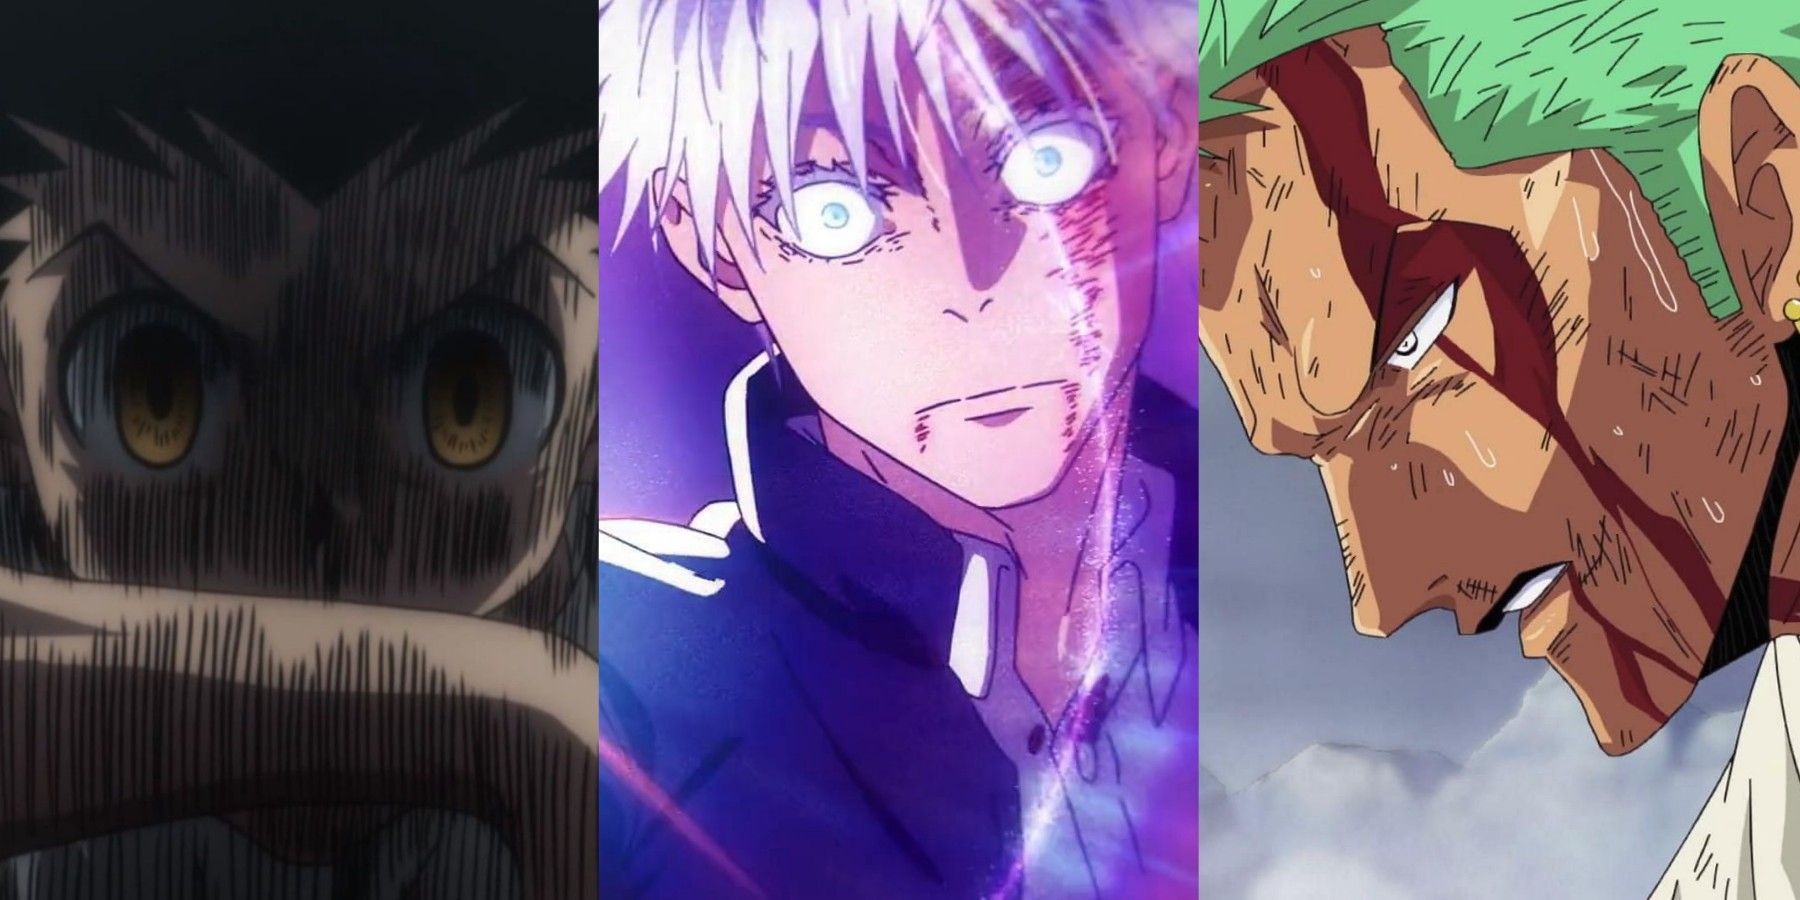 featured classic anime moments that gave fans goosebumps Zoro nothing happened gon angry gojo uses purple